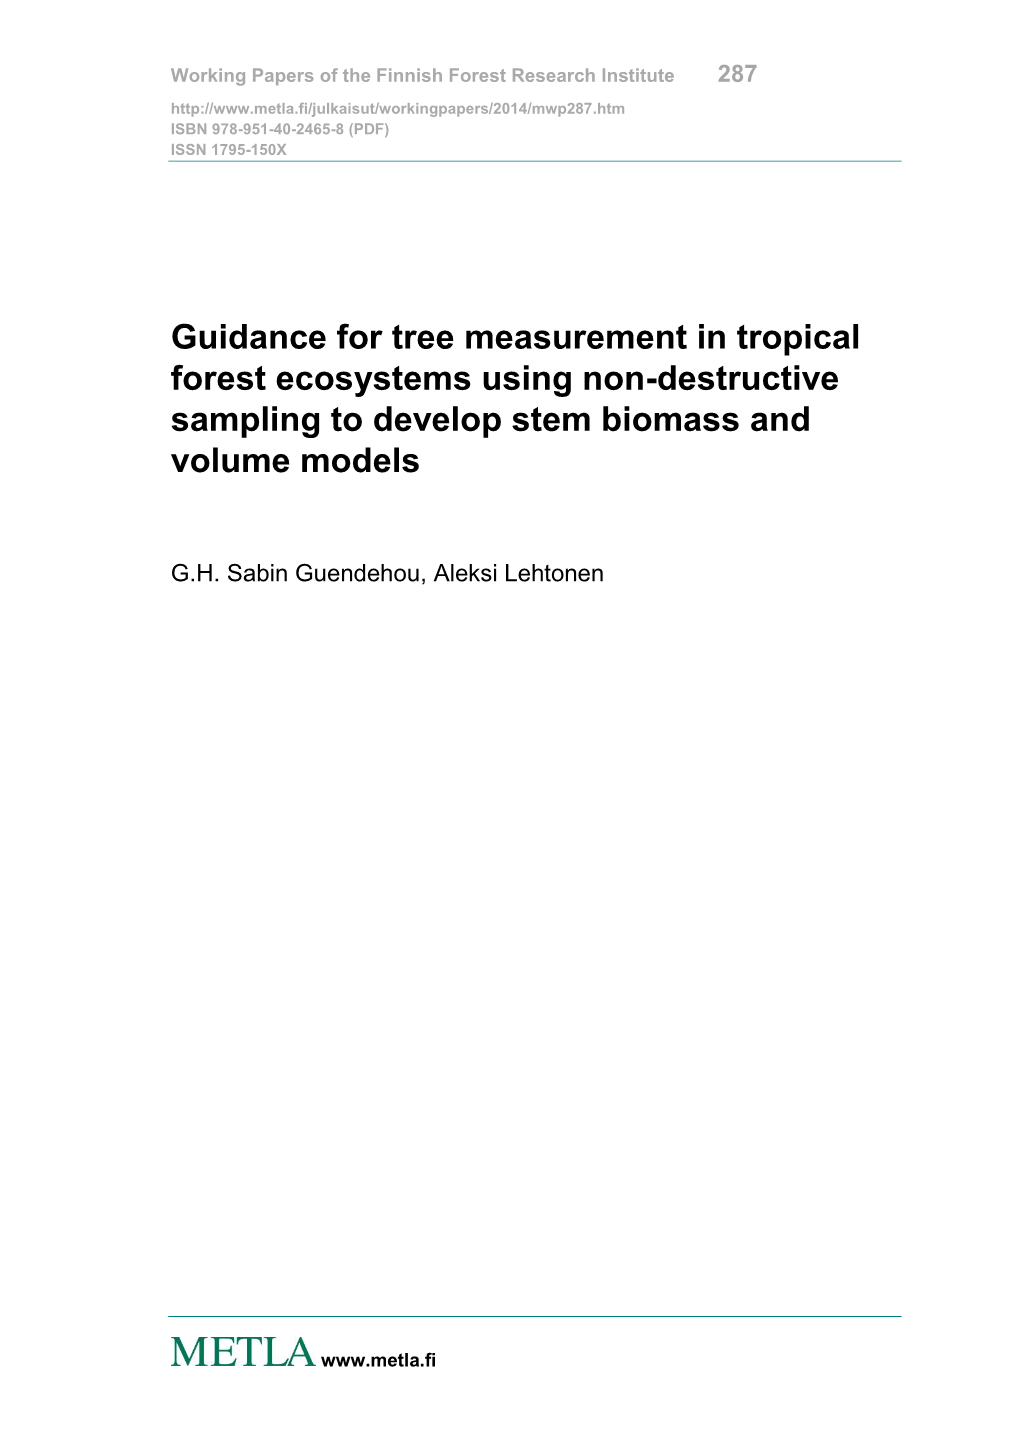 Guidance for Tree Measurement in Tropical Forest Ecosystems Using Non-Destructive Sampling to Develop Stem Biomass and Volume Models